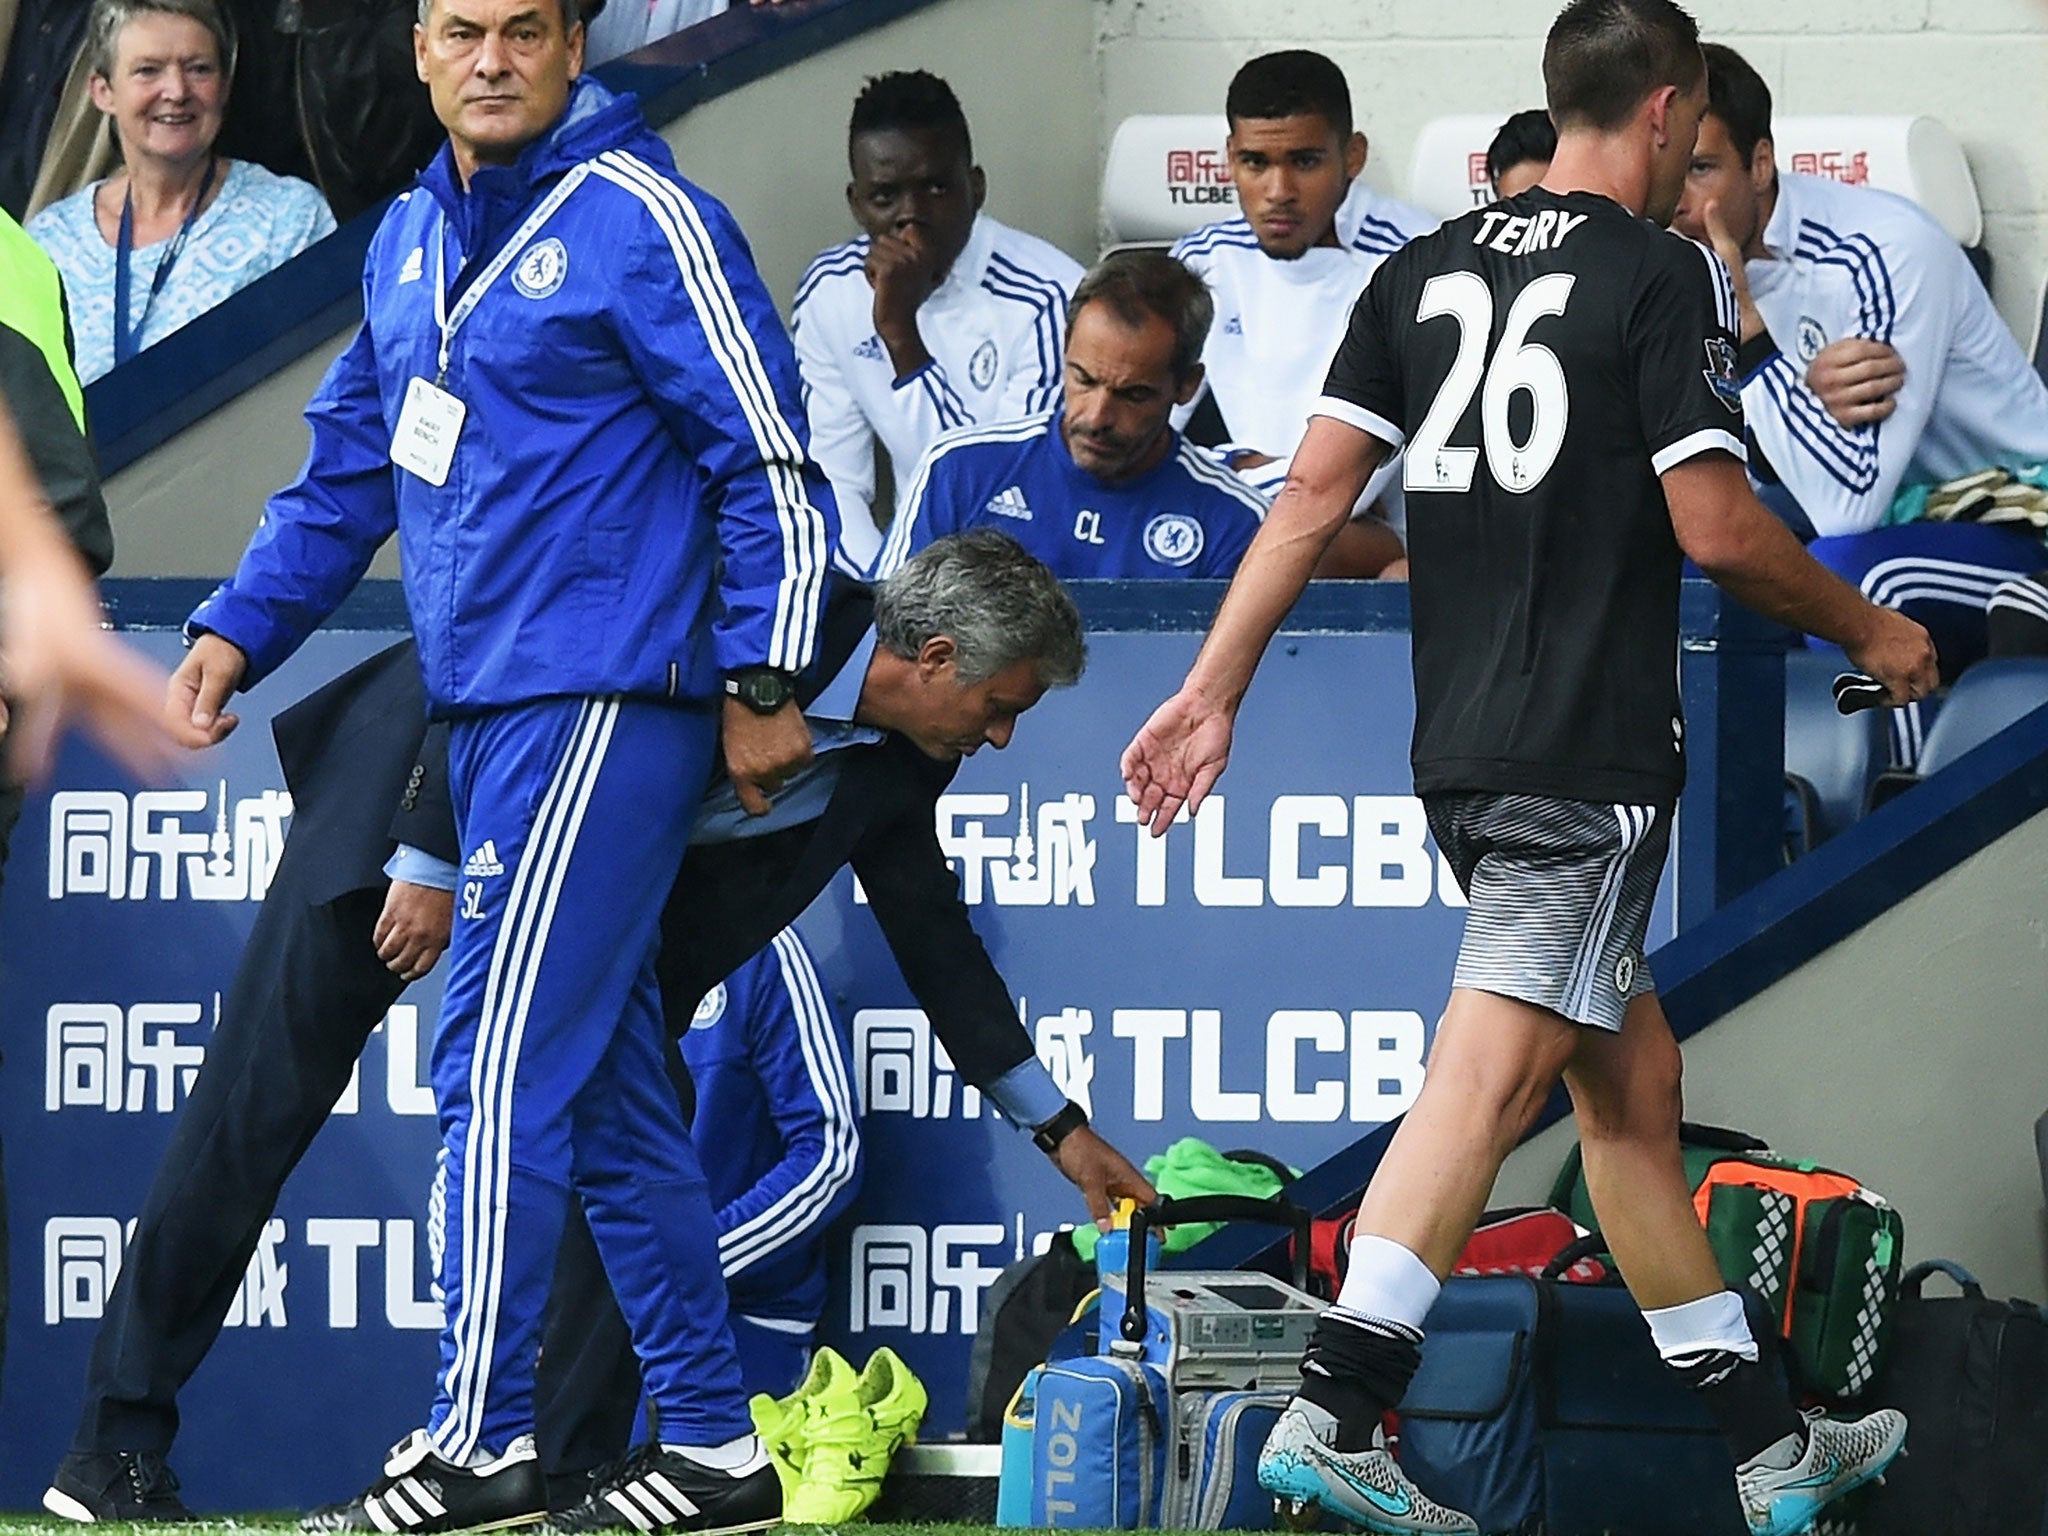 John Terry walks past Jose Mourinho after being shown a red card